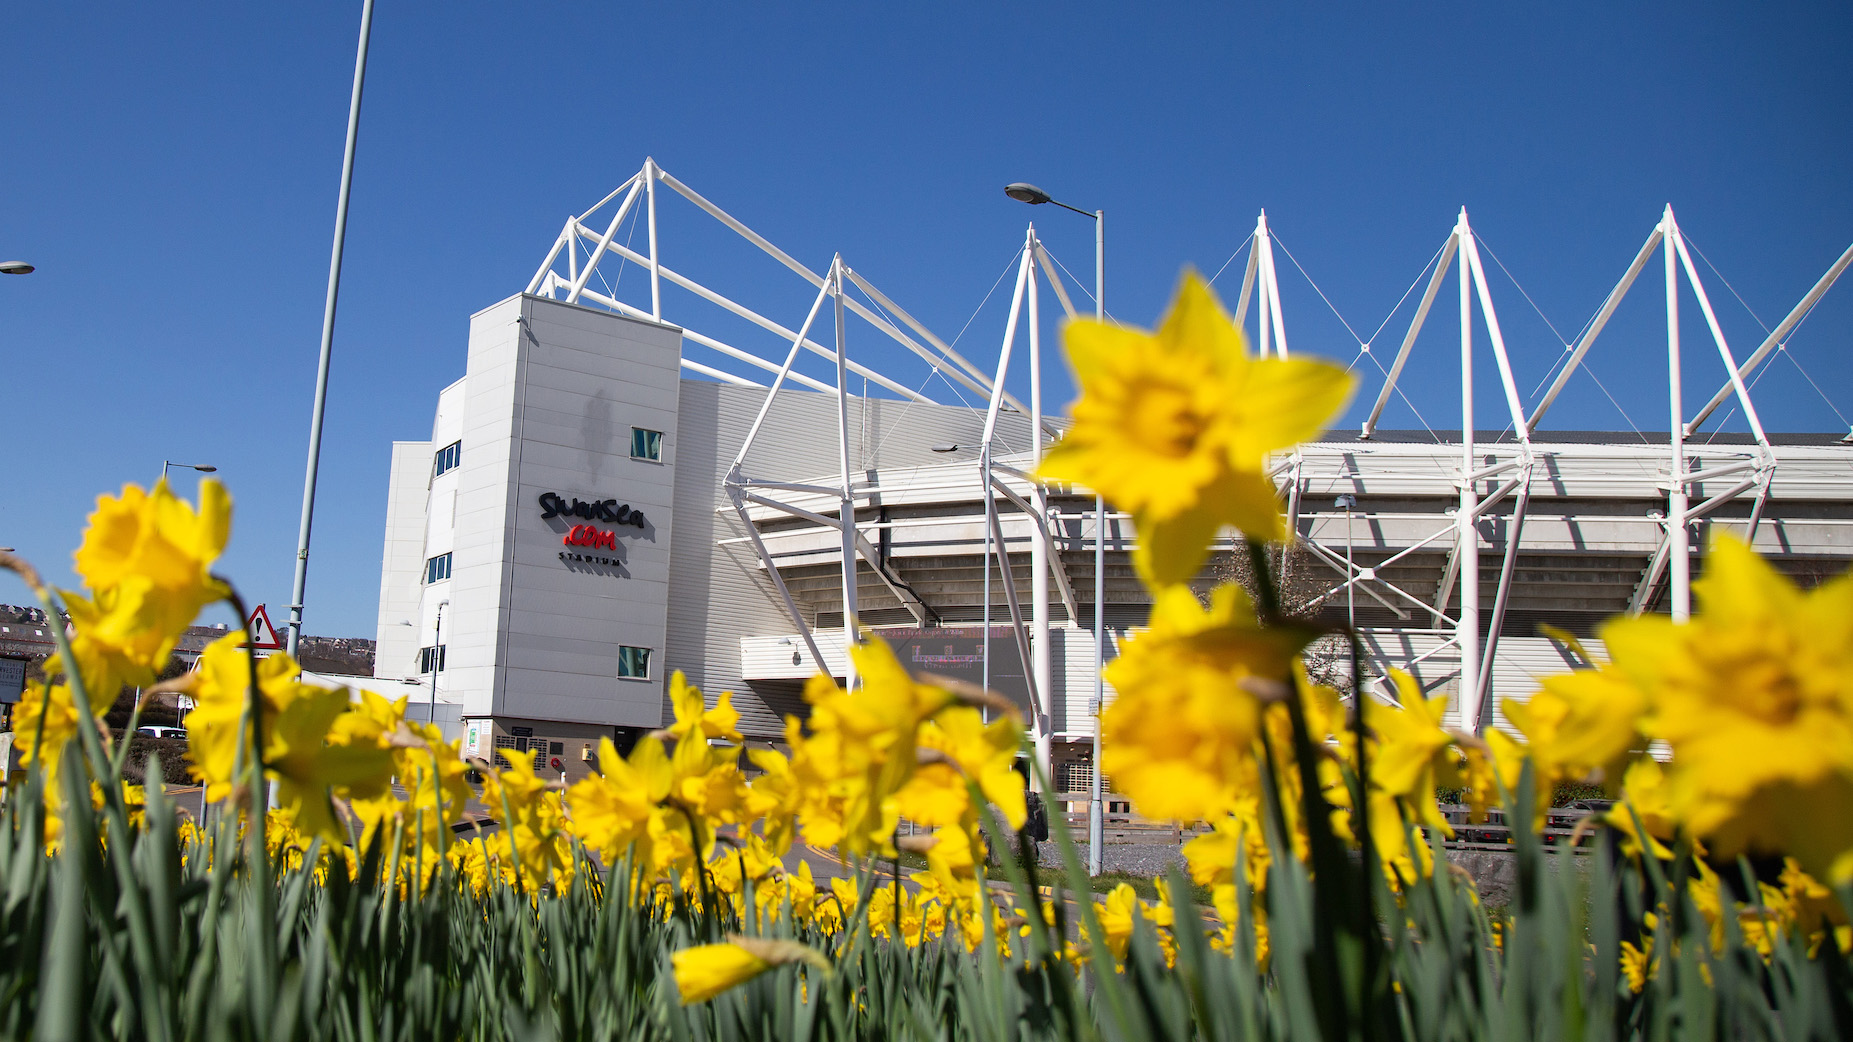 The Swansea.com Stadium is in the distance while in the foreground there are daffodils in soft focus.